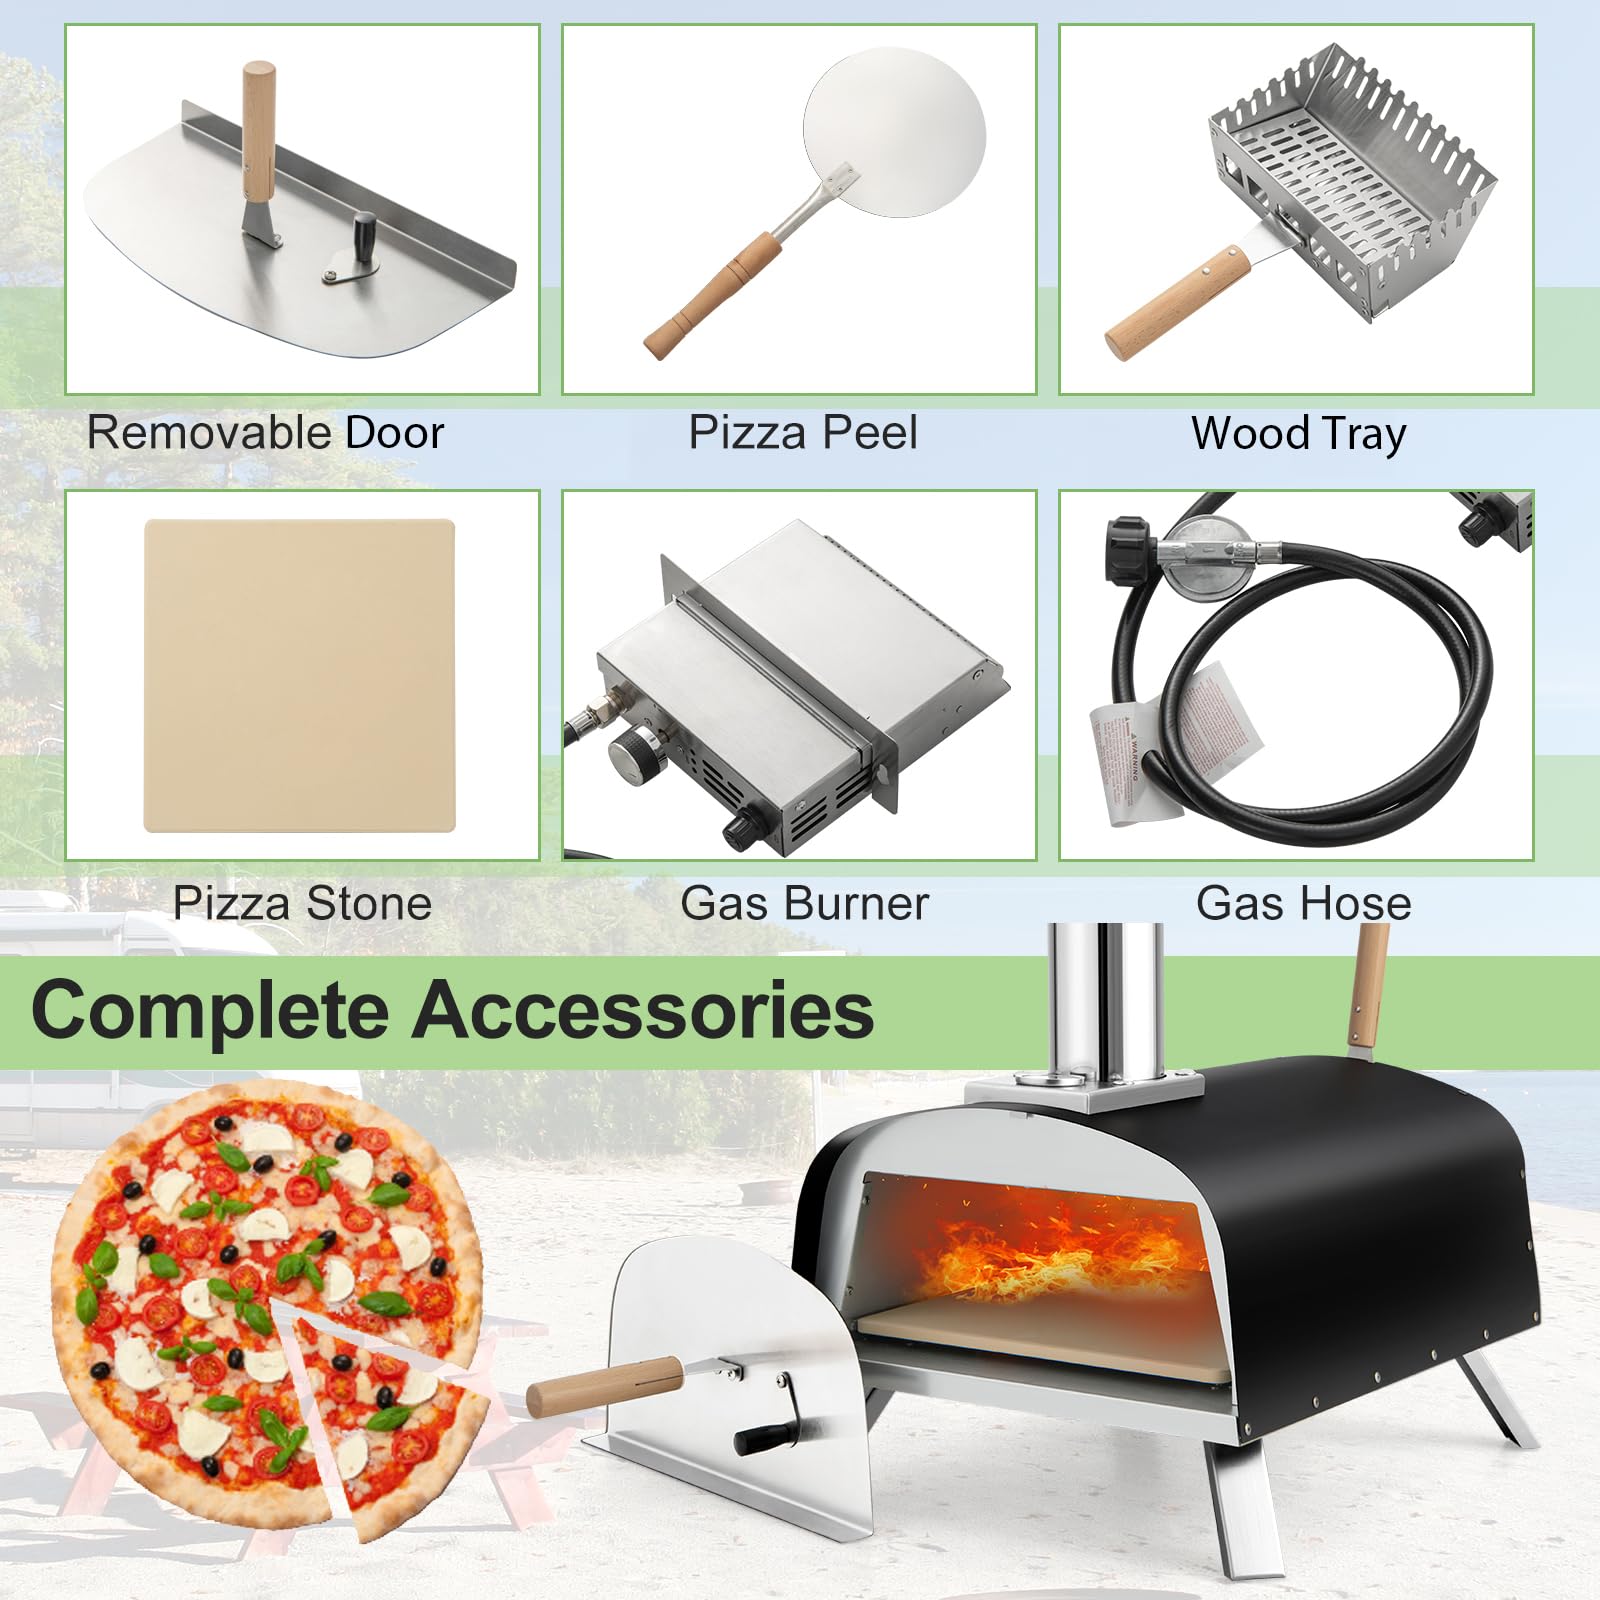 Giantex Pizza Oven Outdoor, Propane and Wood Fired Pizza Maker with 13" Pizza Stone, Pizza Peel